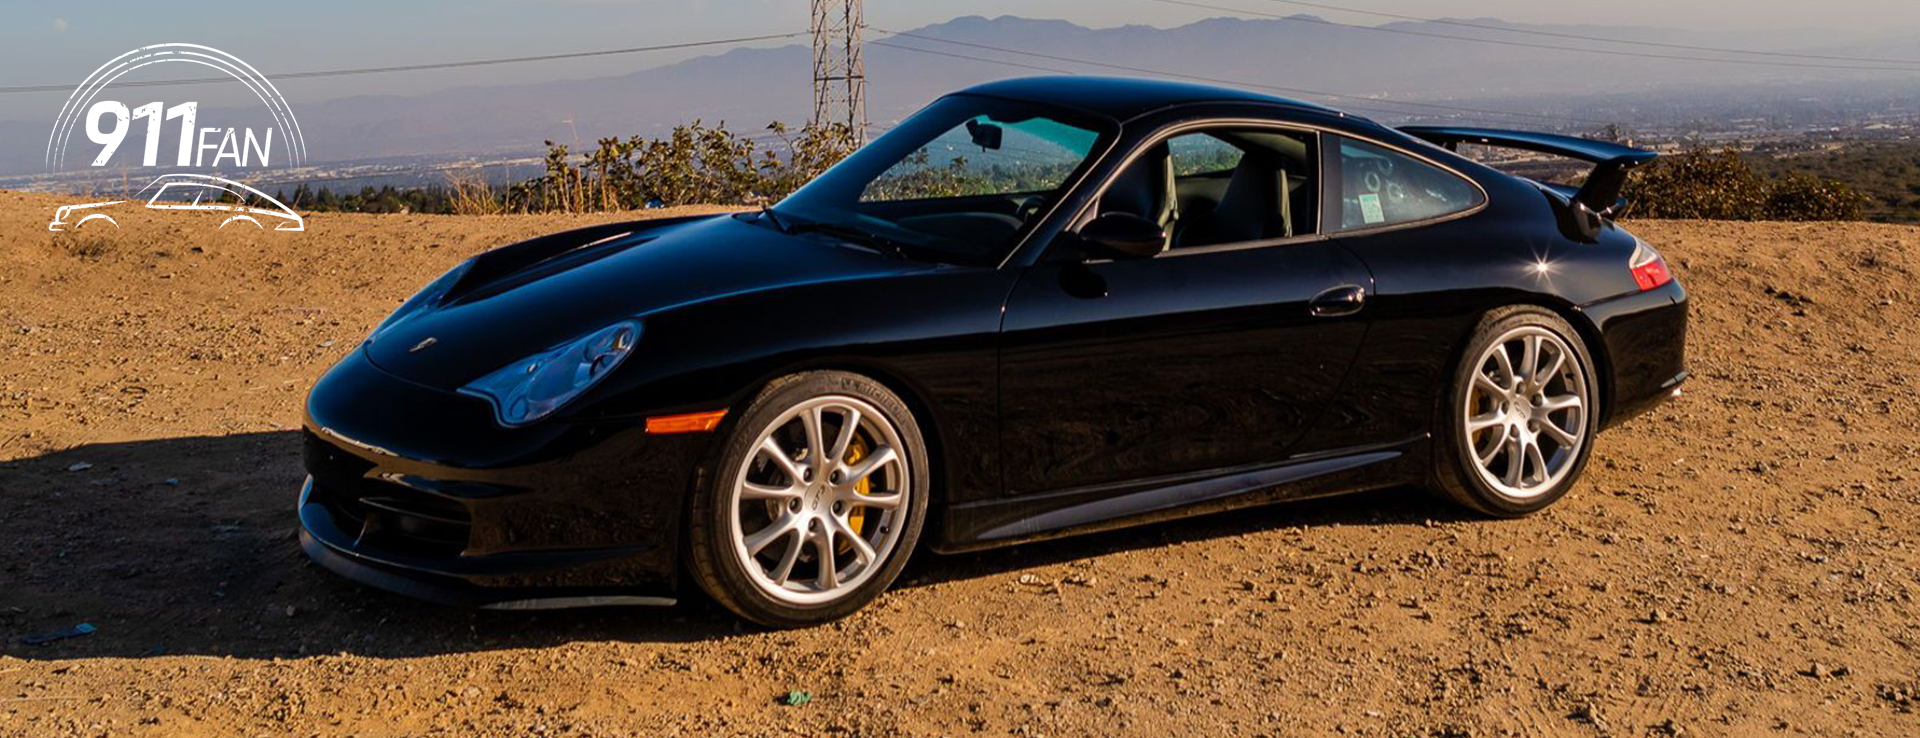 Black 911 (996) GT3 on gravel, mountains behind